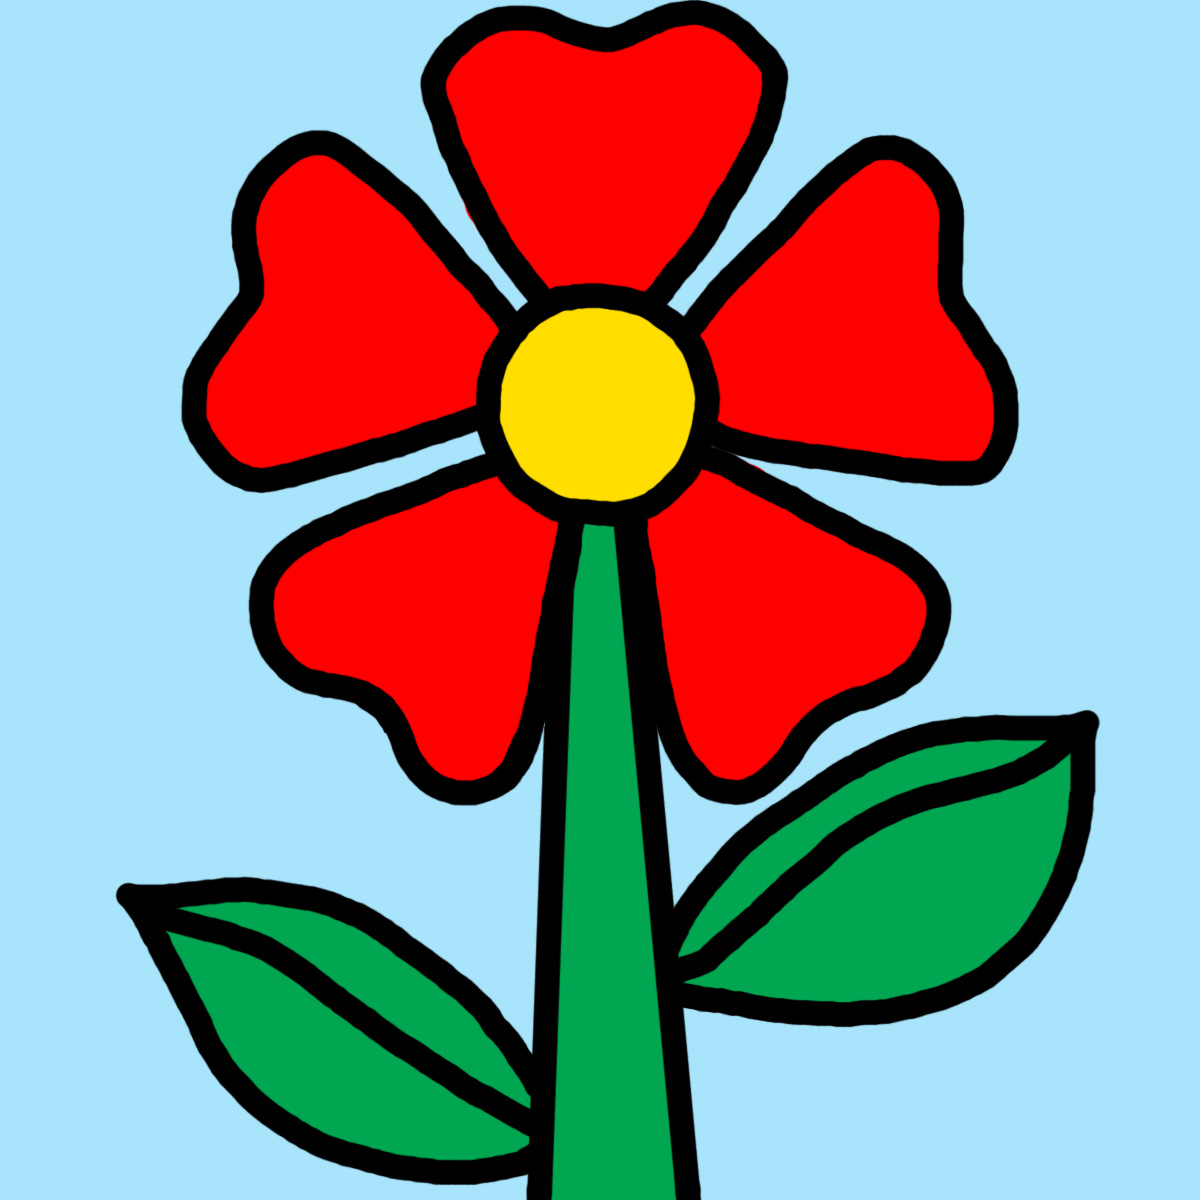 Flower Clipart - Free Clipart Images